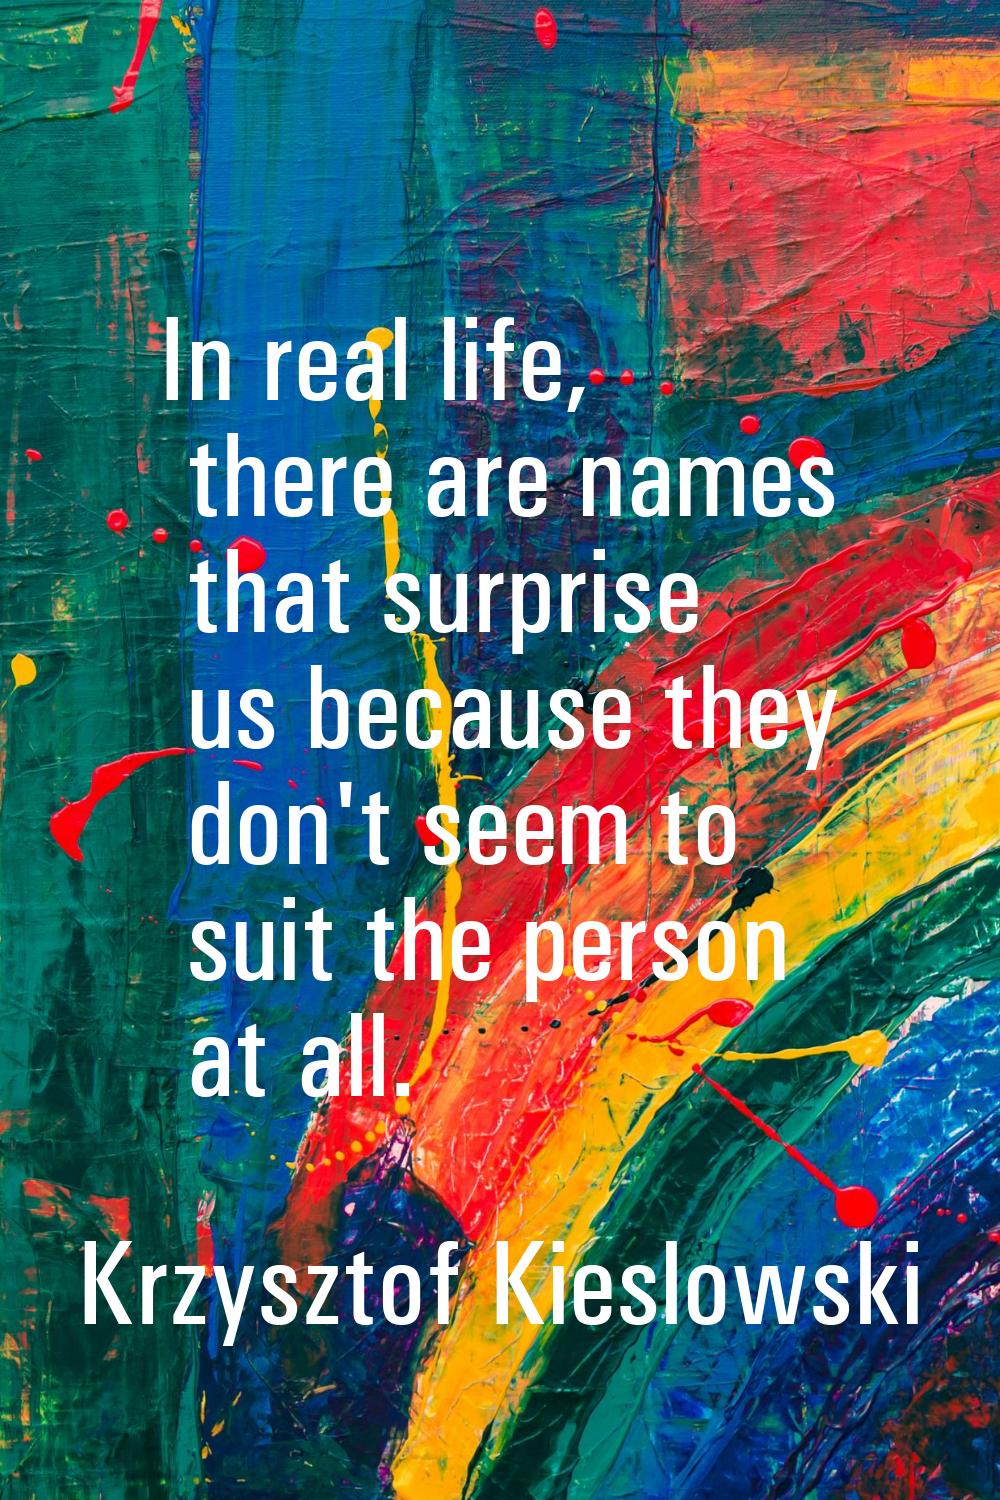 In real life, there are names that surprise us because they don't seem to suit the person at all.